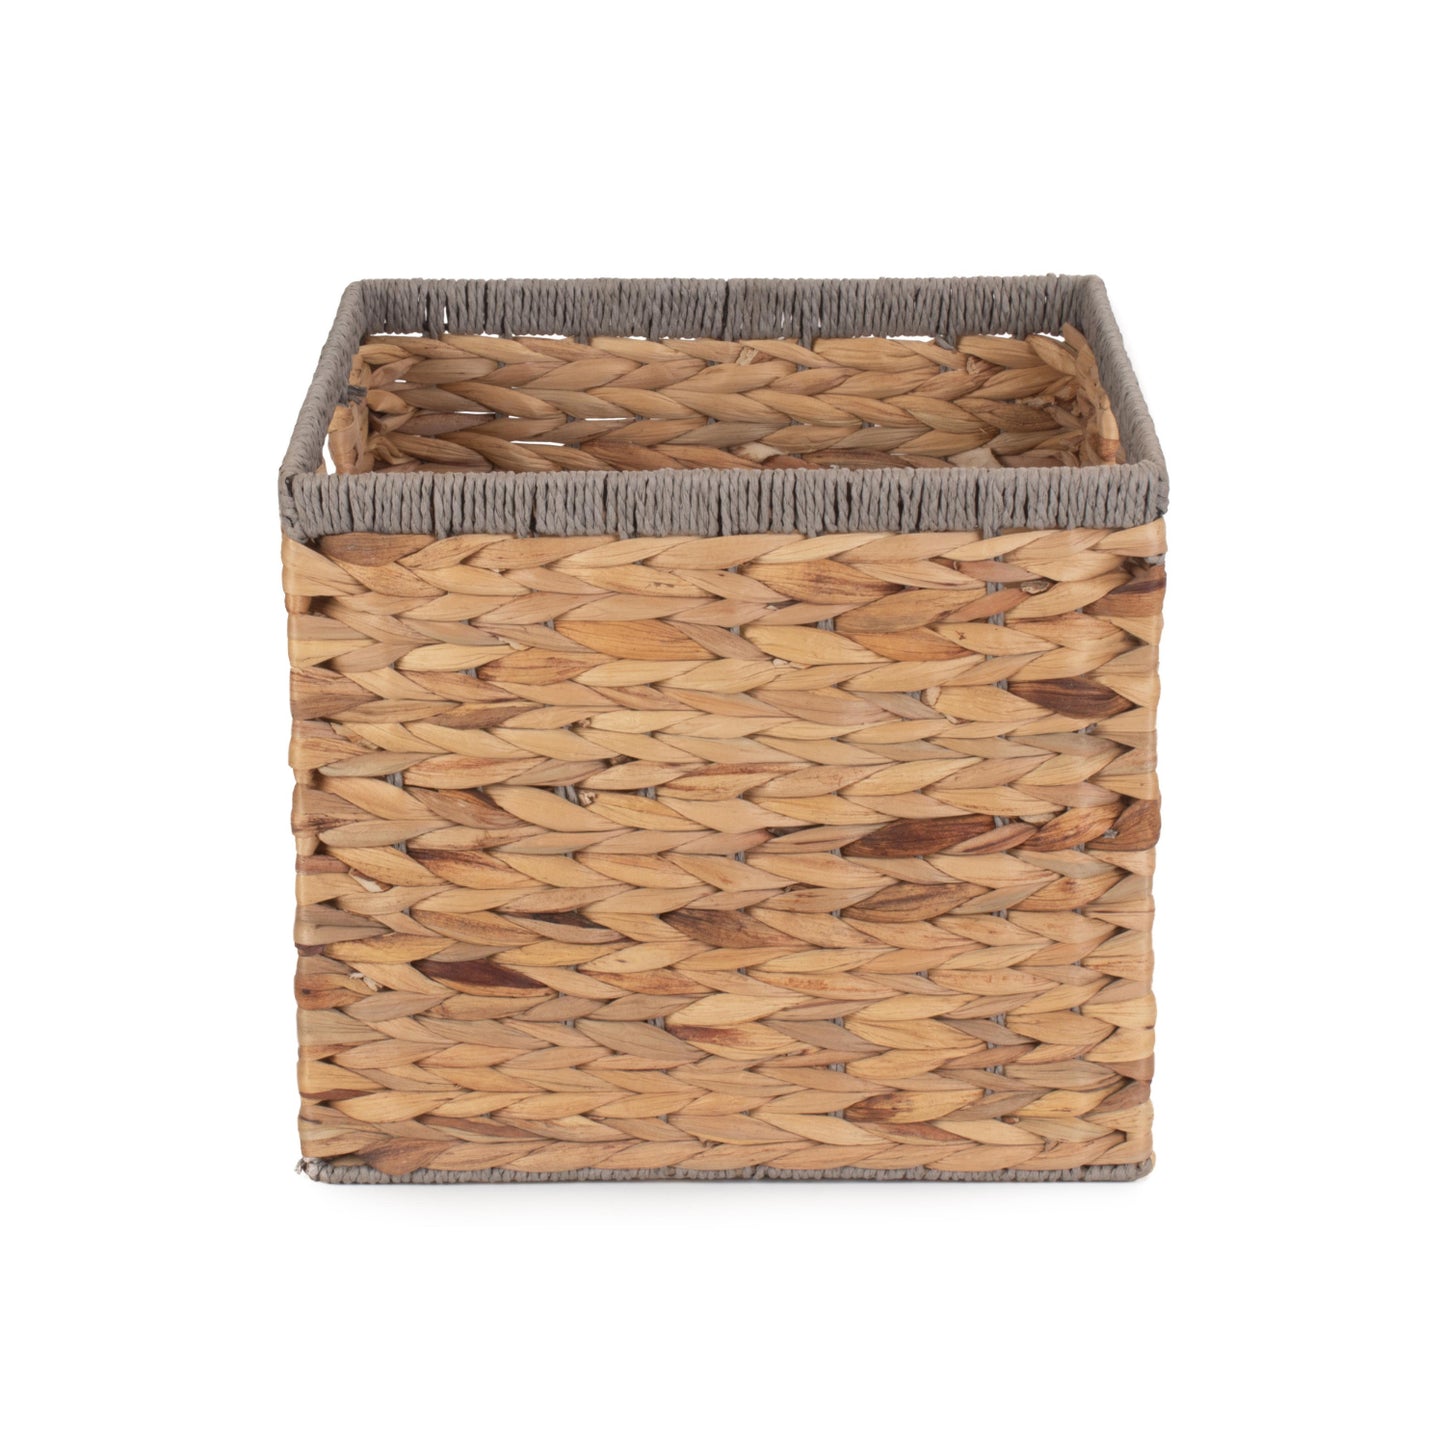 Small Square Water Hyacinth Storage Basket With Grey Rope Border